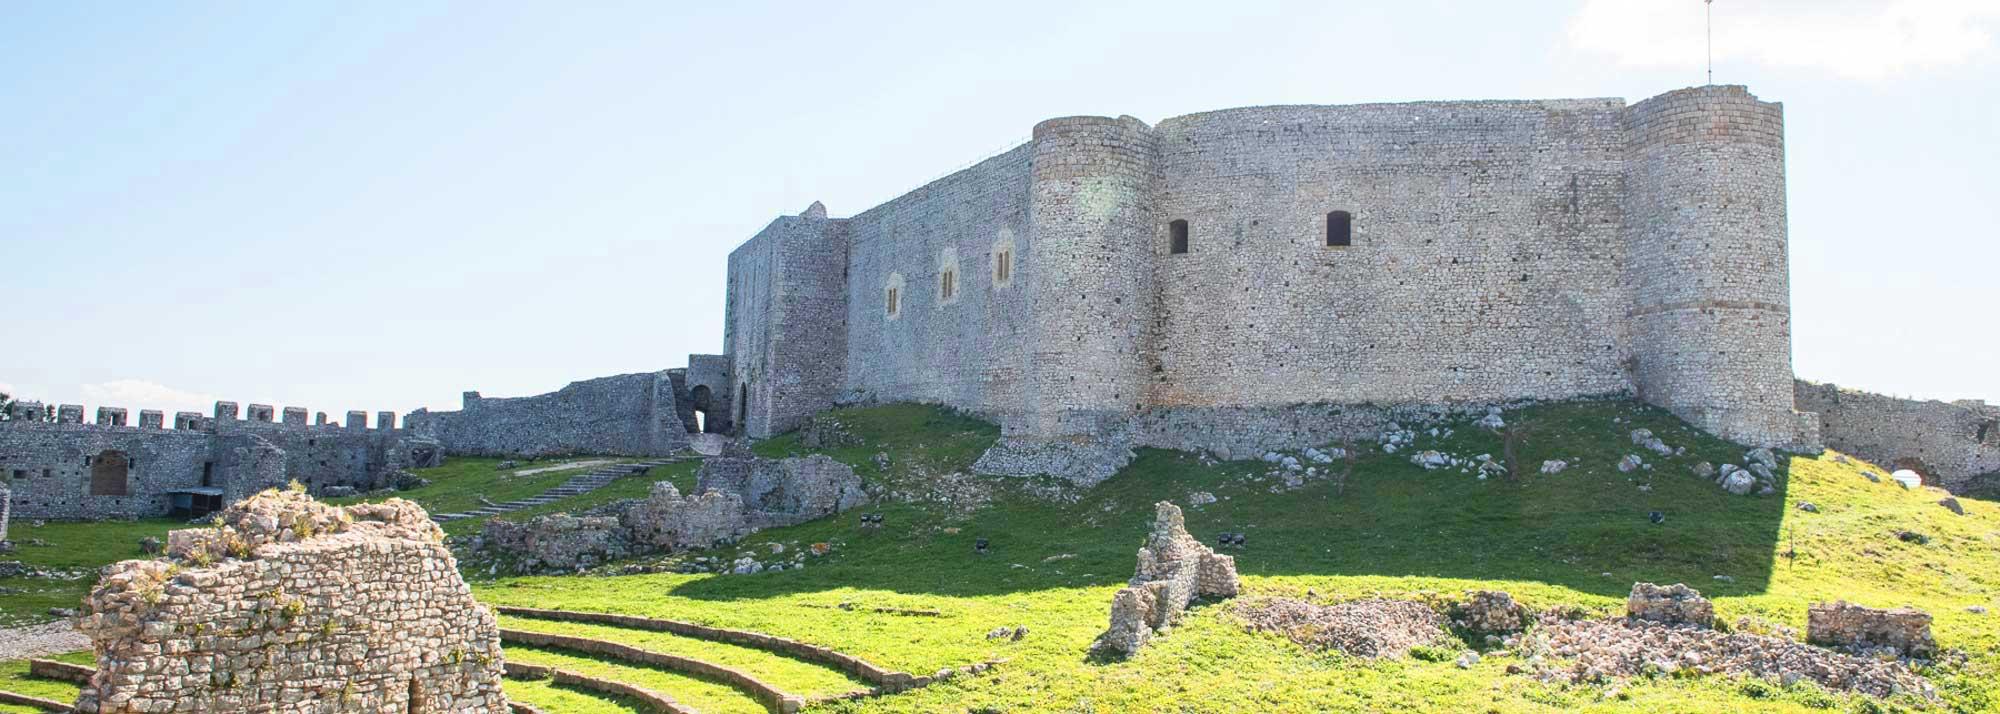 The central part of the Chlemoutsi Castle is a two-storey hexagonal structure that housed the princely palace. – © Hellenic Ministry of Culture and Sports / Ephorate of Antiquities of Ilia